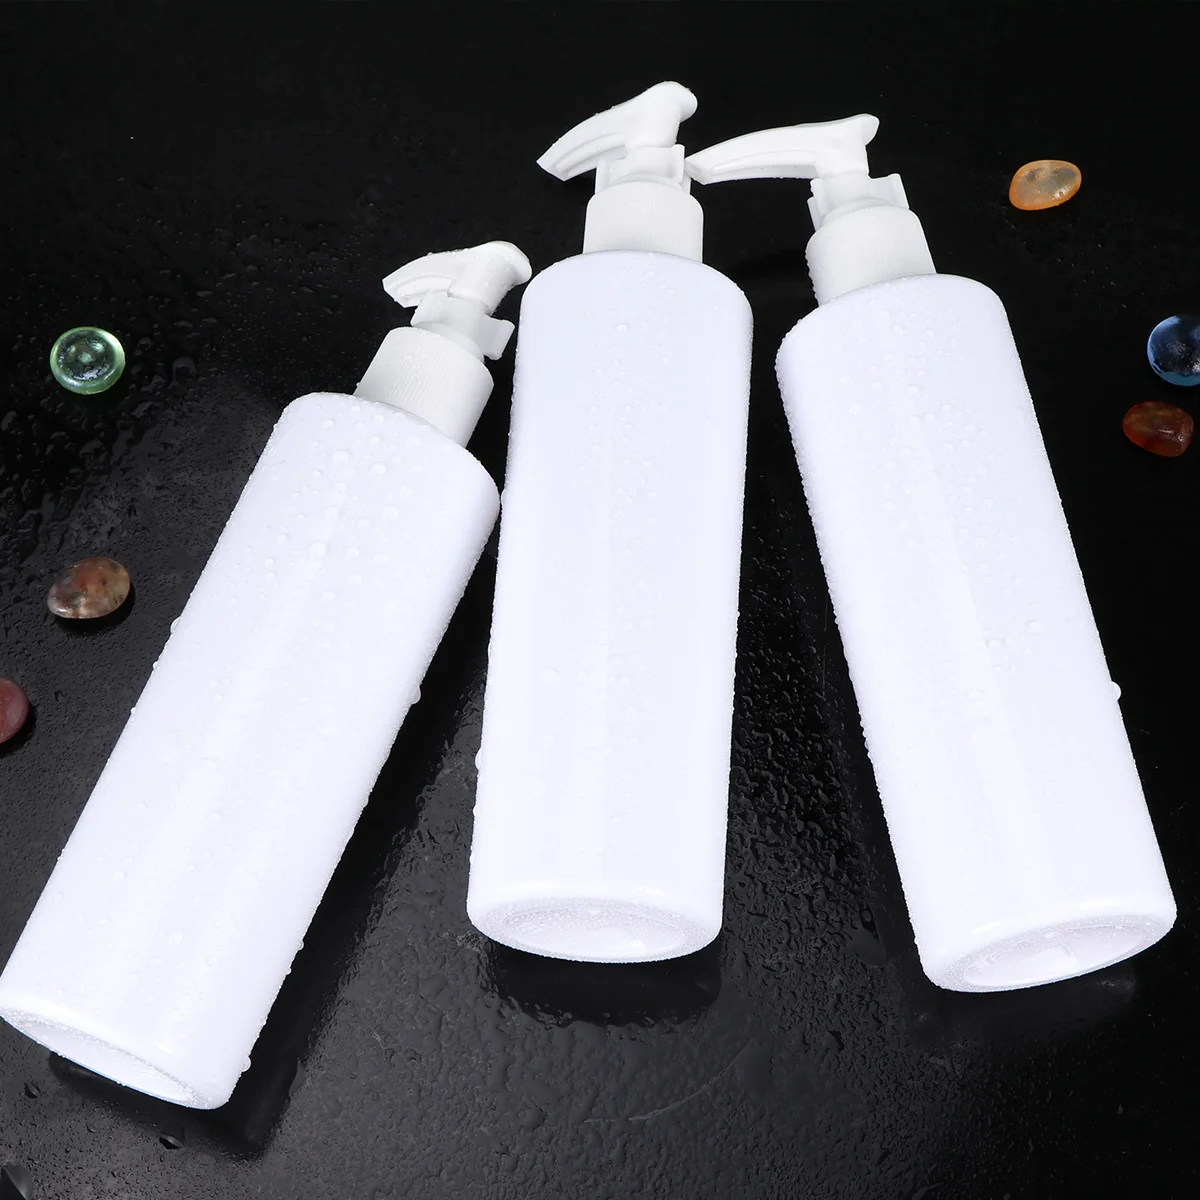 6PCS Travel Bottles 250ML Lotion Dispenser Bottle Multi- Pressure Lotion Subpackaging Pump Bottle for Dorm Hotel Home Kitchen electric single coil hot plate cooktop easy to clean portable countertop stove for home dorm or office new dropship